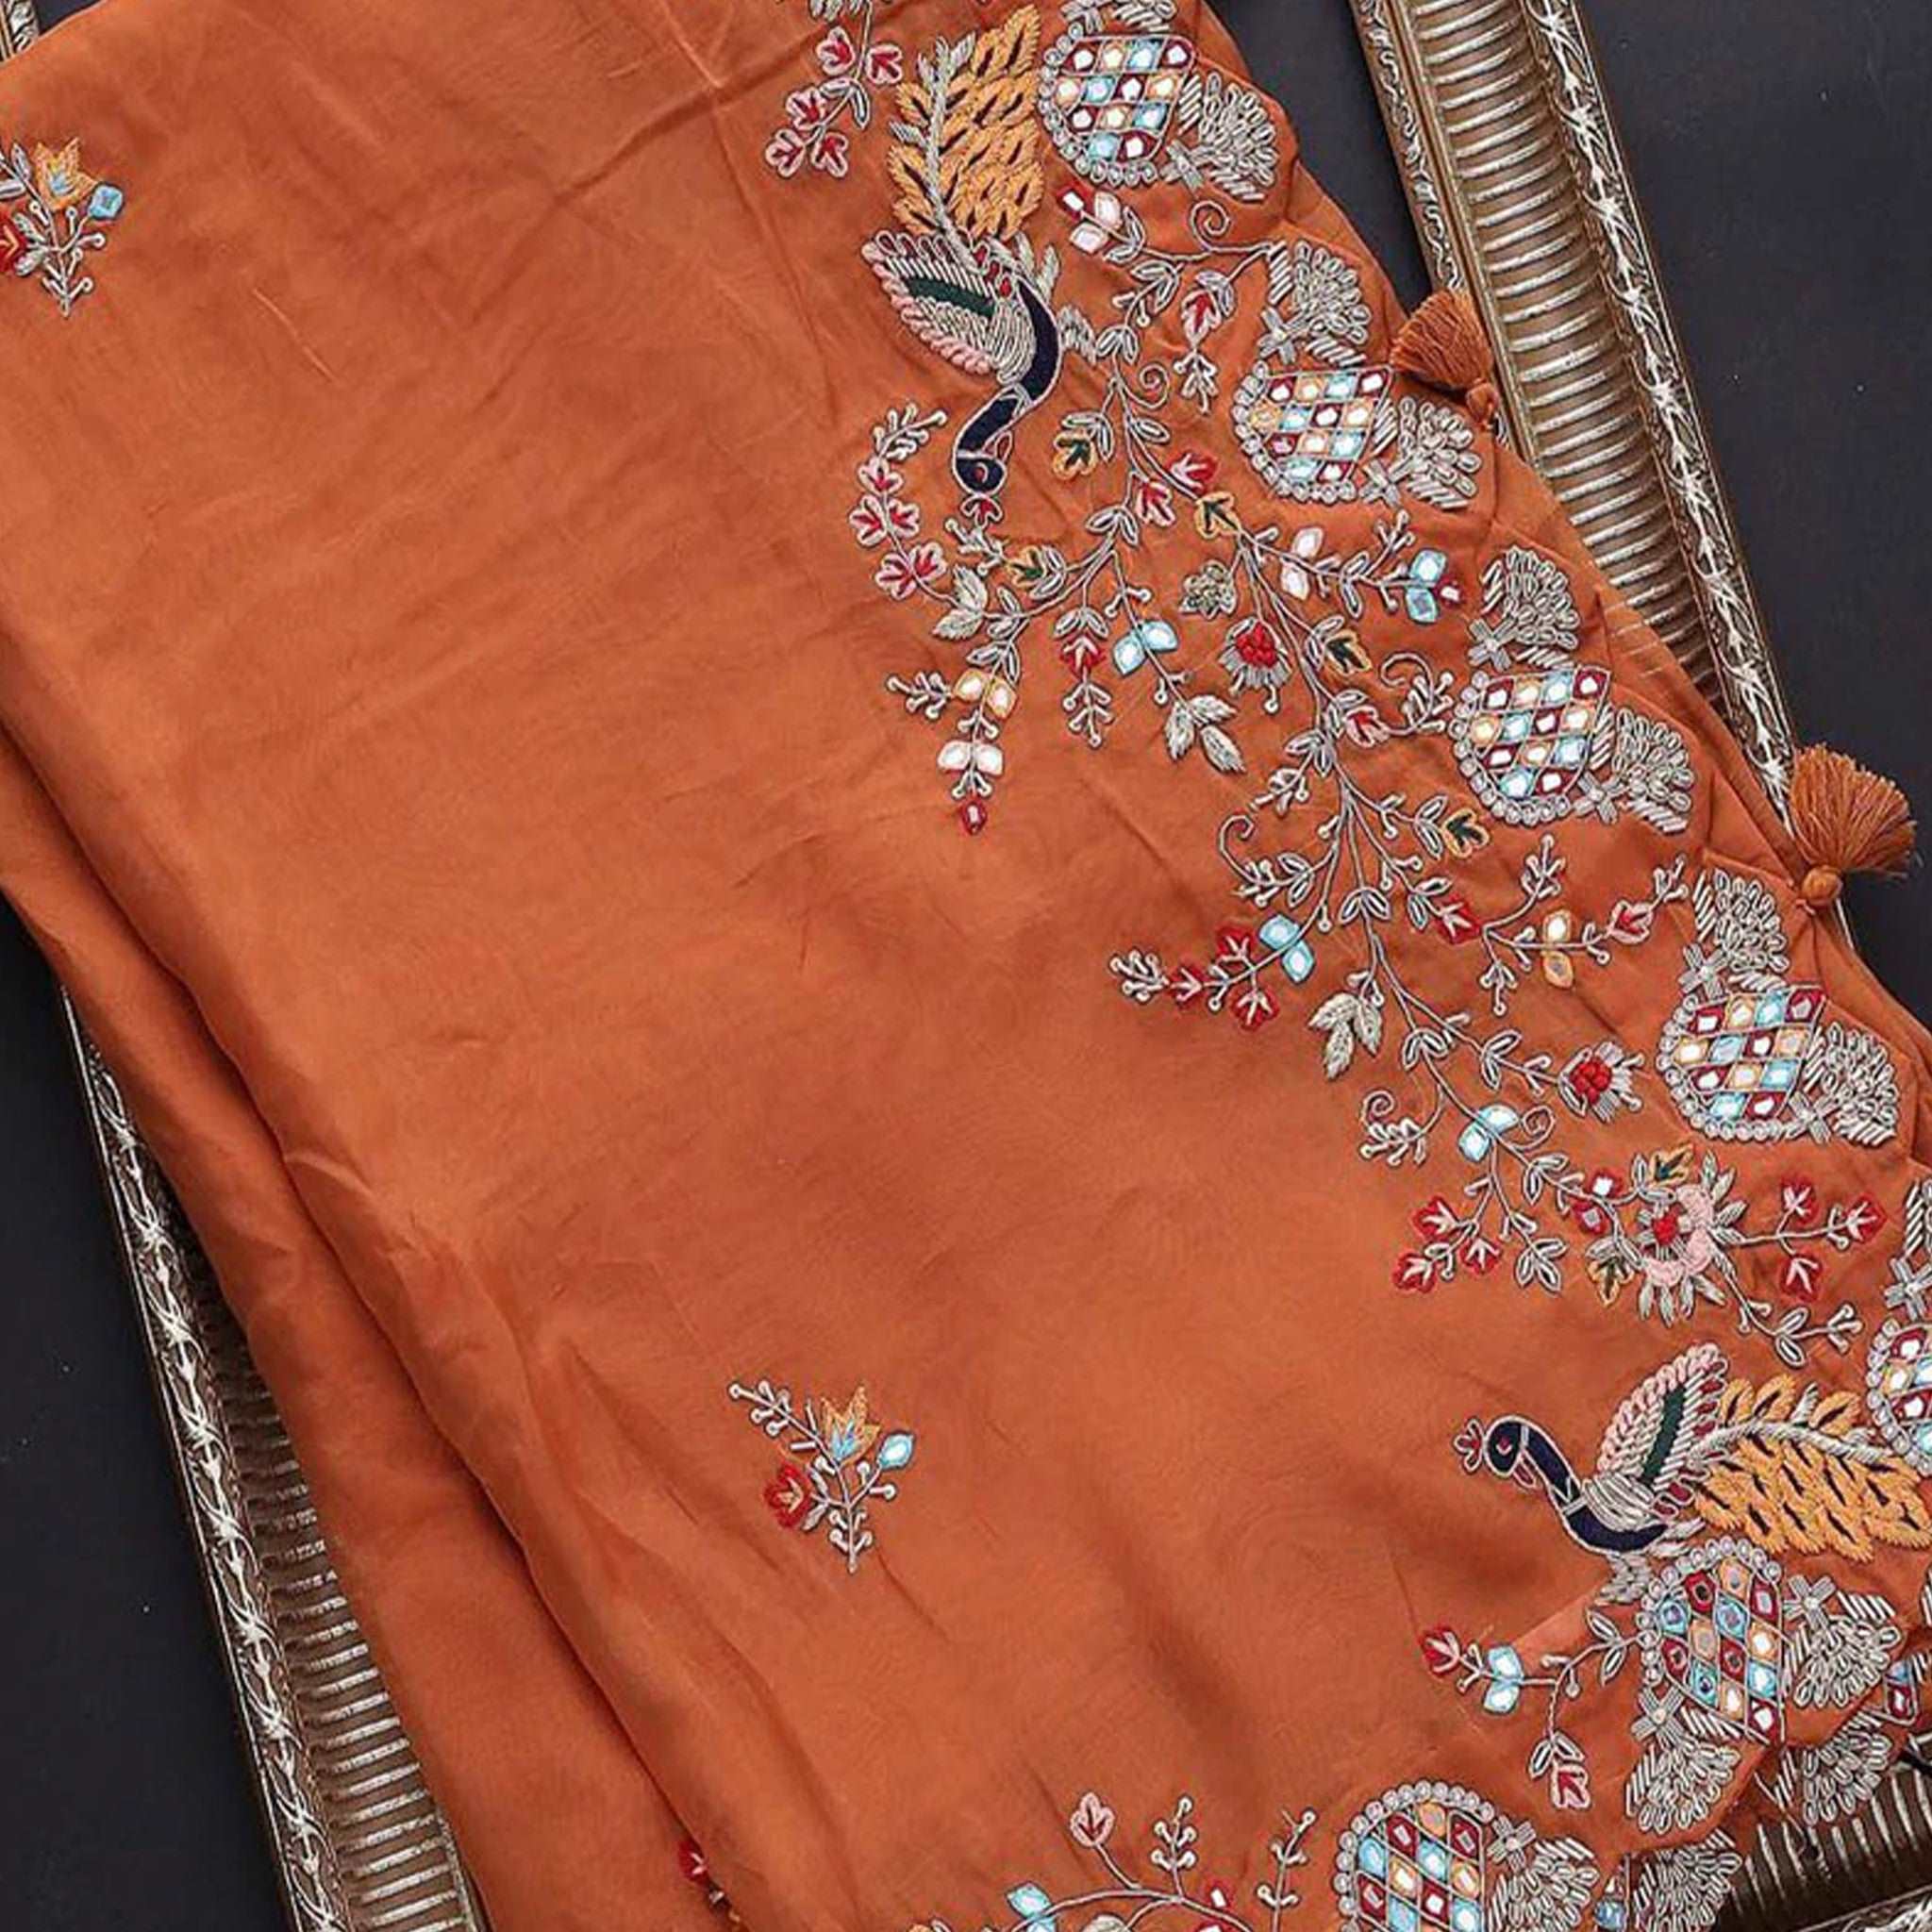 Beautiful Organza Orange Saree with Embroidery work and Contrast matching Mehendi Blouse - Colorful Saree